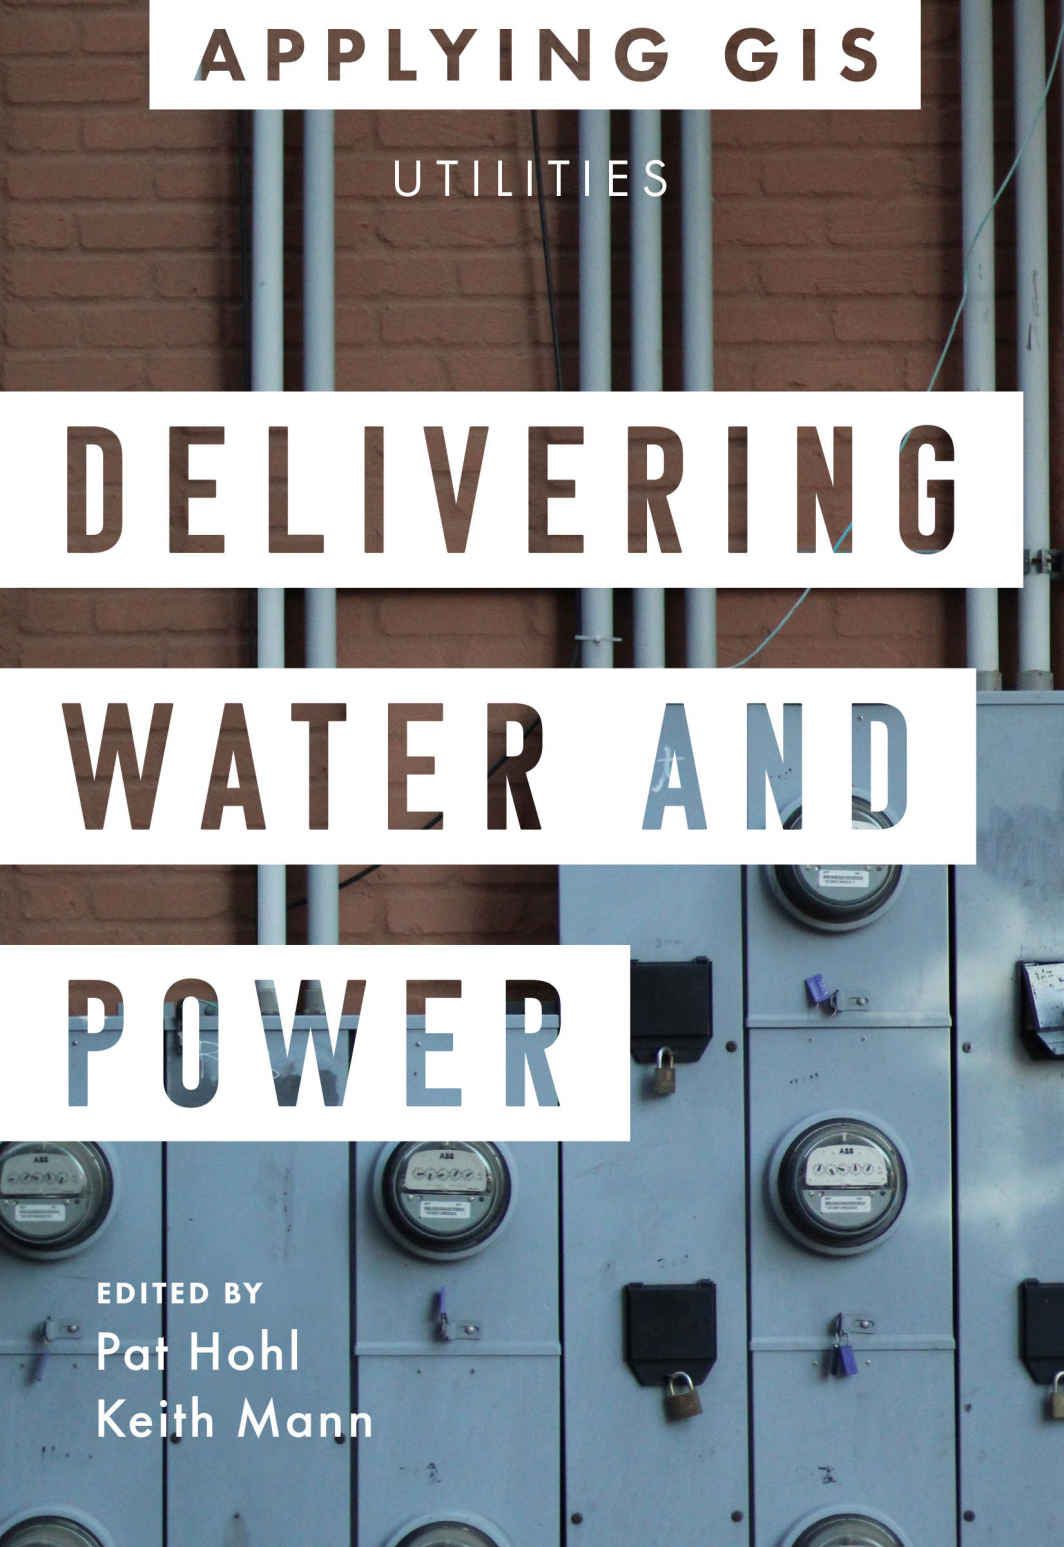 Esri's new book introduces Water and Power Utilities to GIS Spatial Analytics